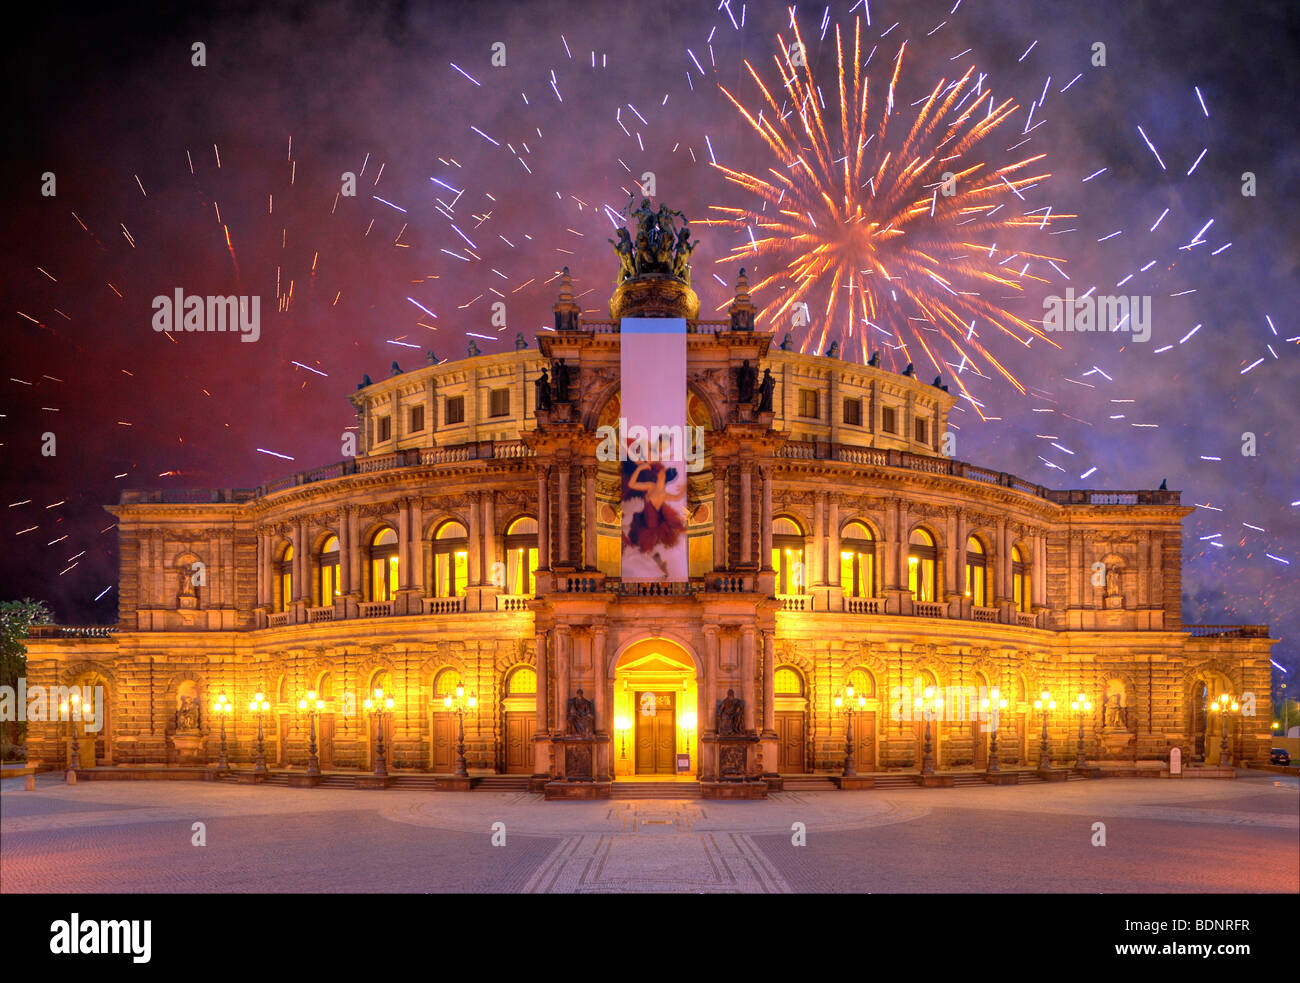 Semperoper opera, with banners, at Theaterplatz square, fireworks, Dresden, Saxony, Germany, Europe Stock Photo